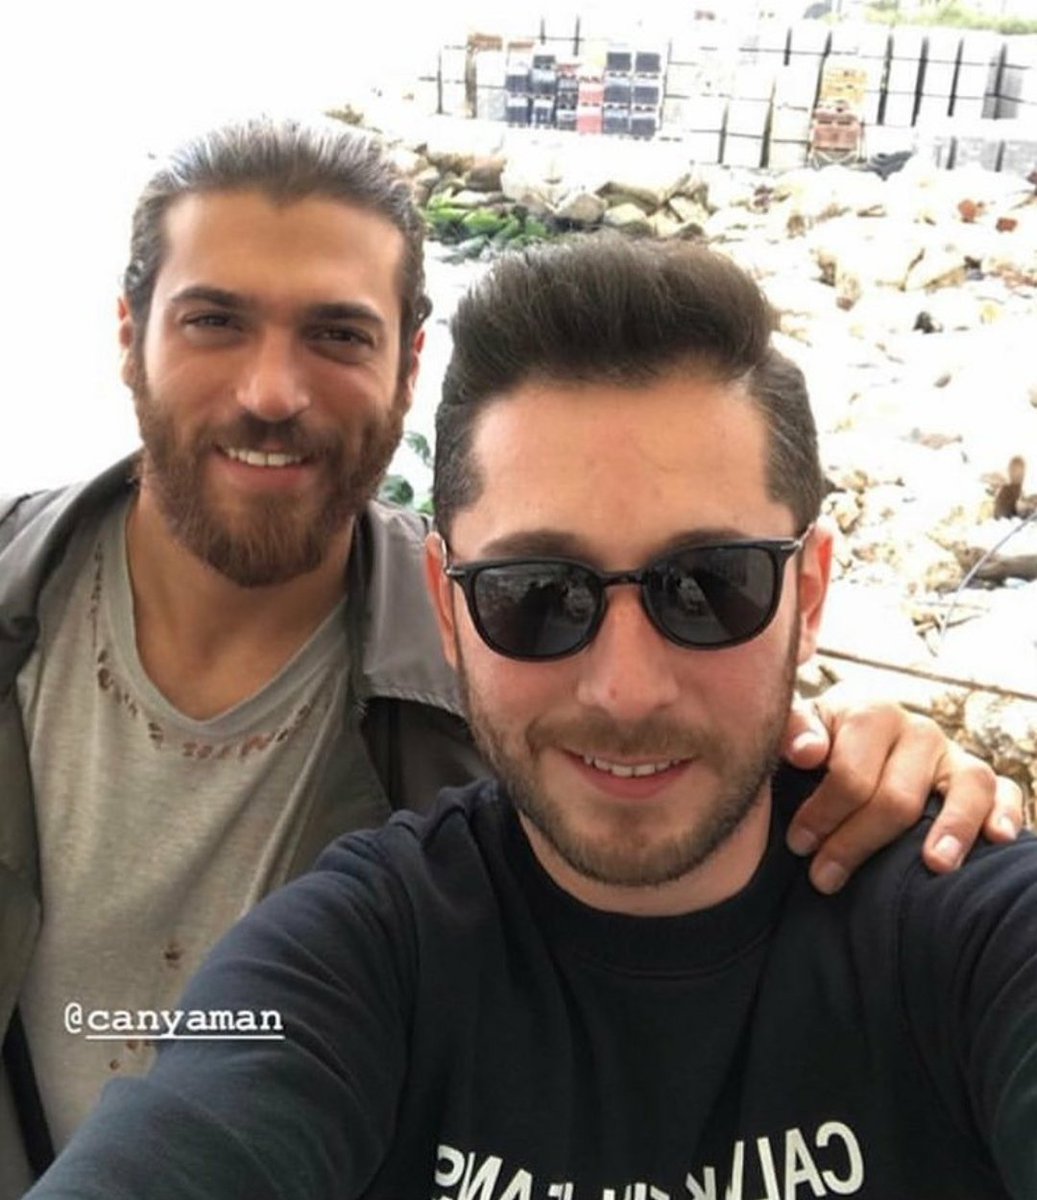 Burak is such a good friend, he travelled with Can and had the opportunity to be with him in such a special moment while they received a worldwide prize   #CanYaman  #DemetÖzdemir